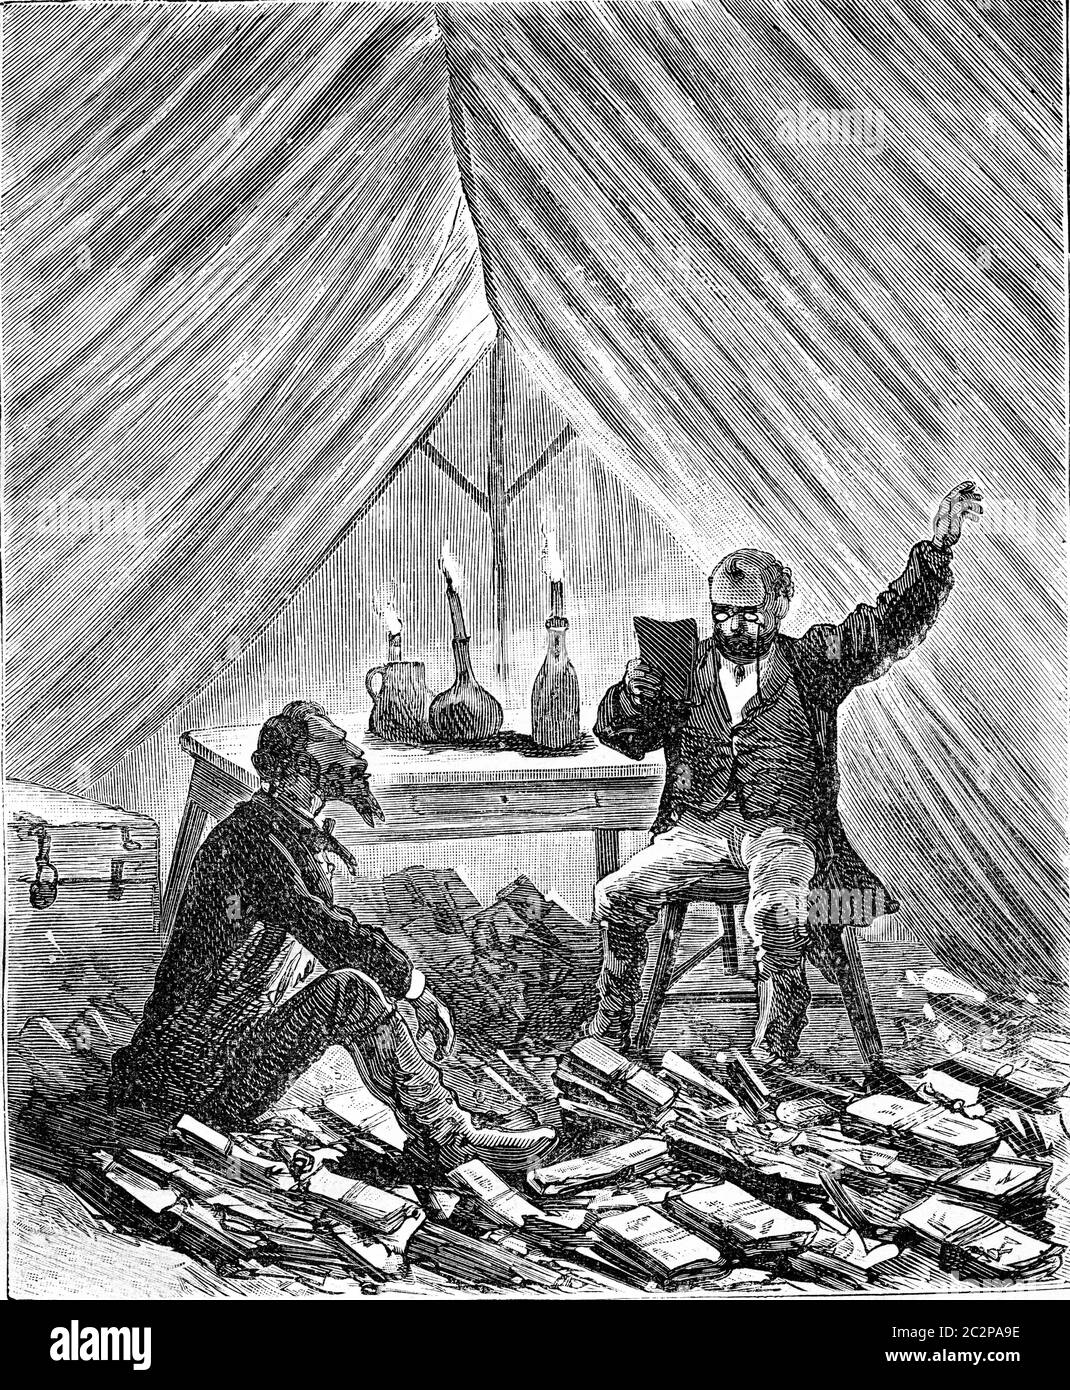 Six thousand miles through South America. Two men in a tent reading books by candlelight. From Travel Diaries, vintage engraving, 1884-85. Stock Photo